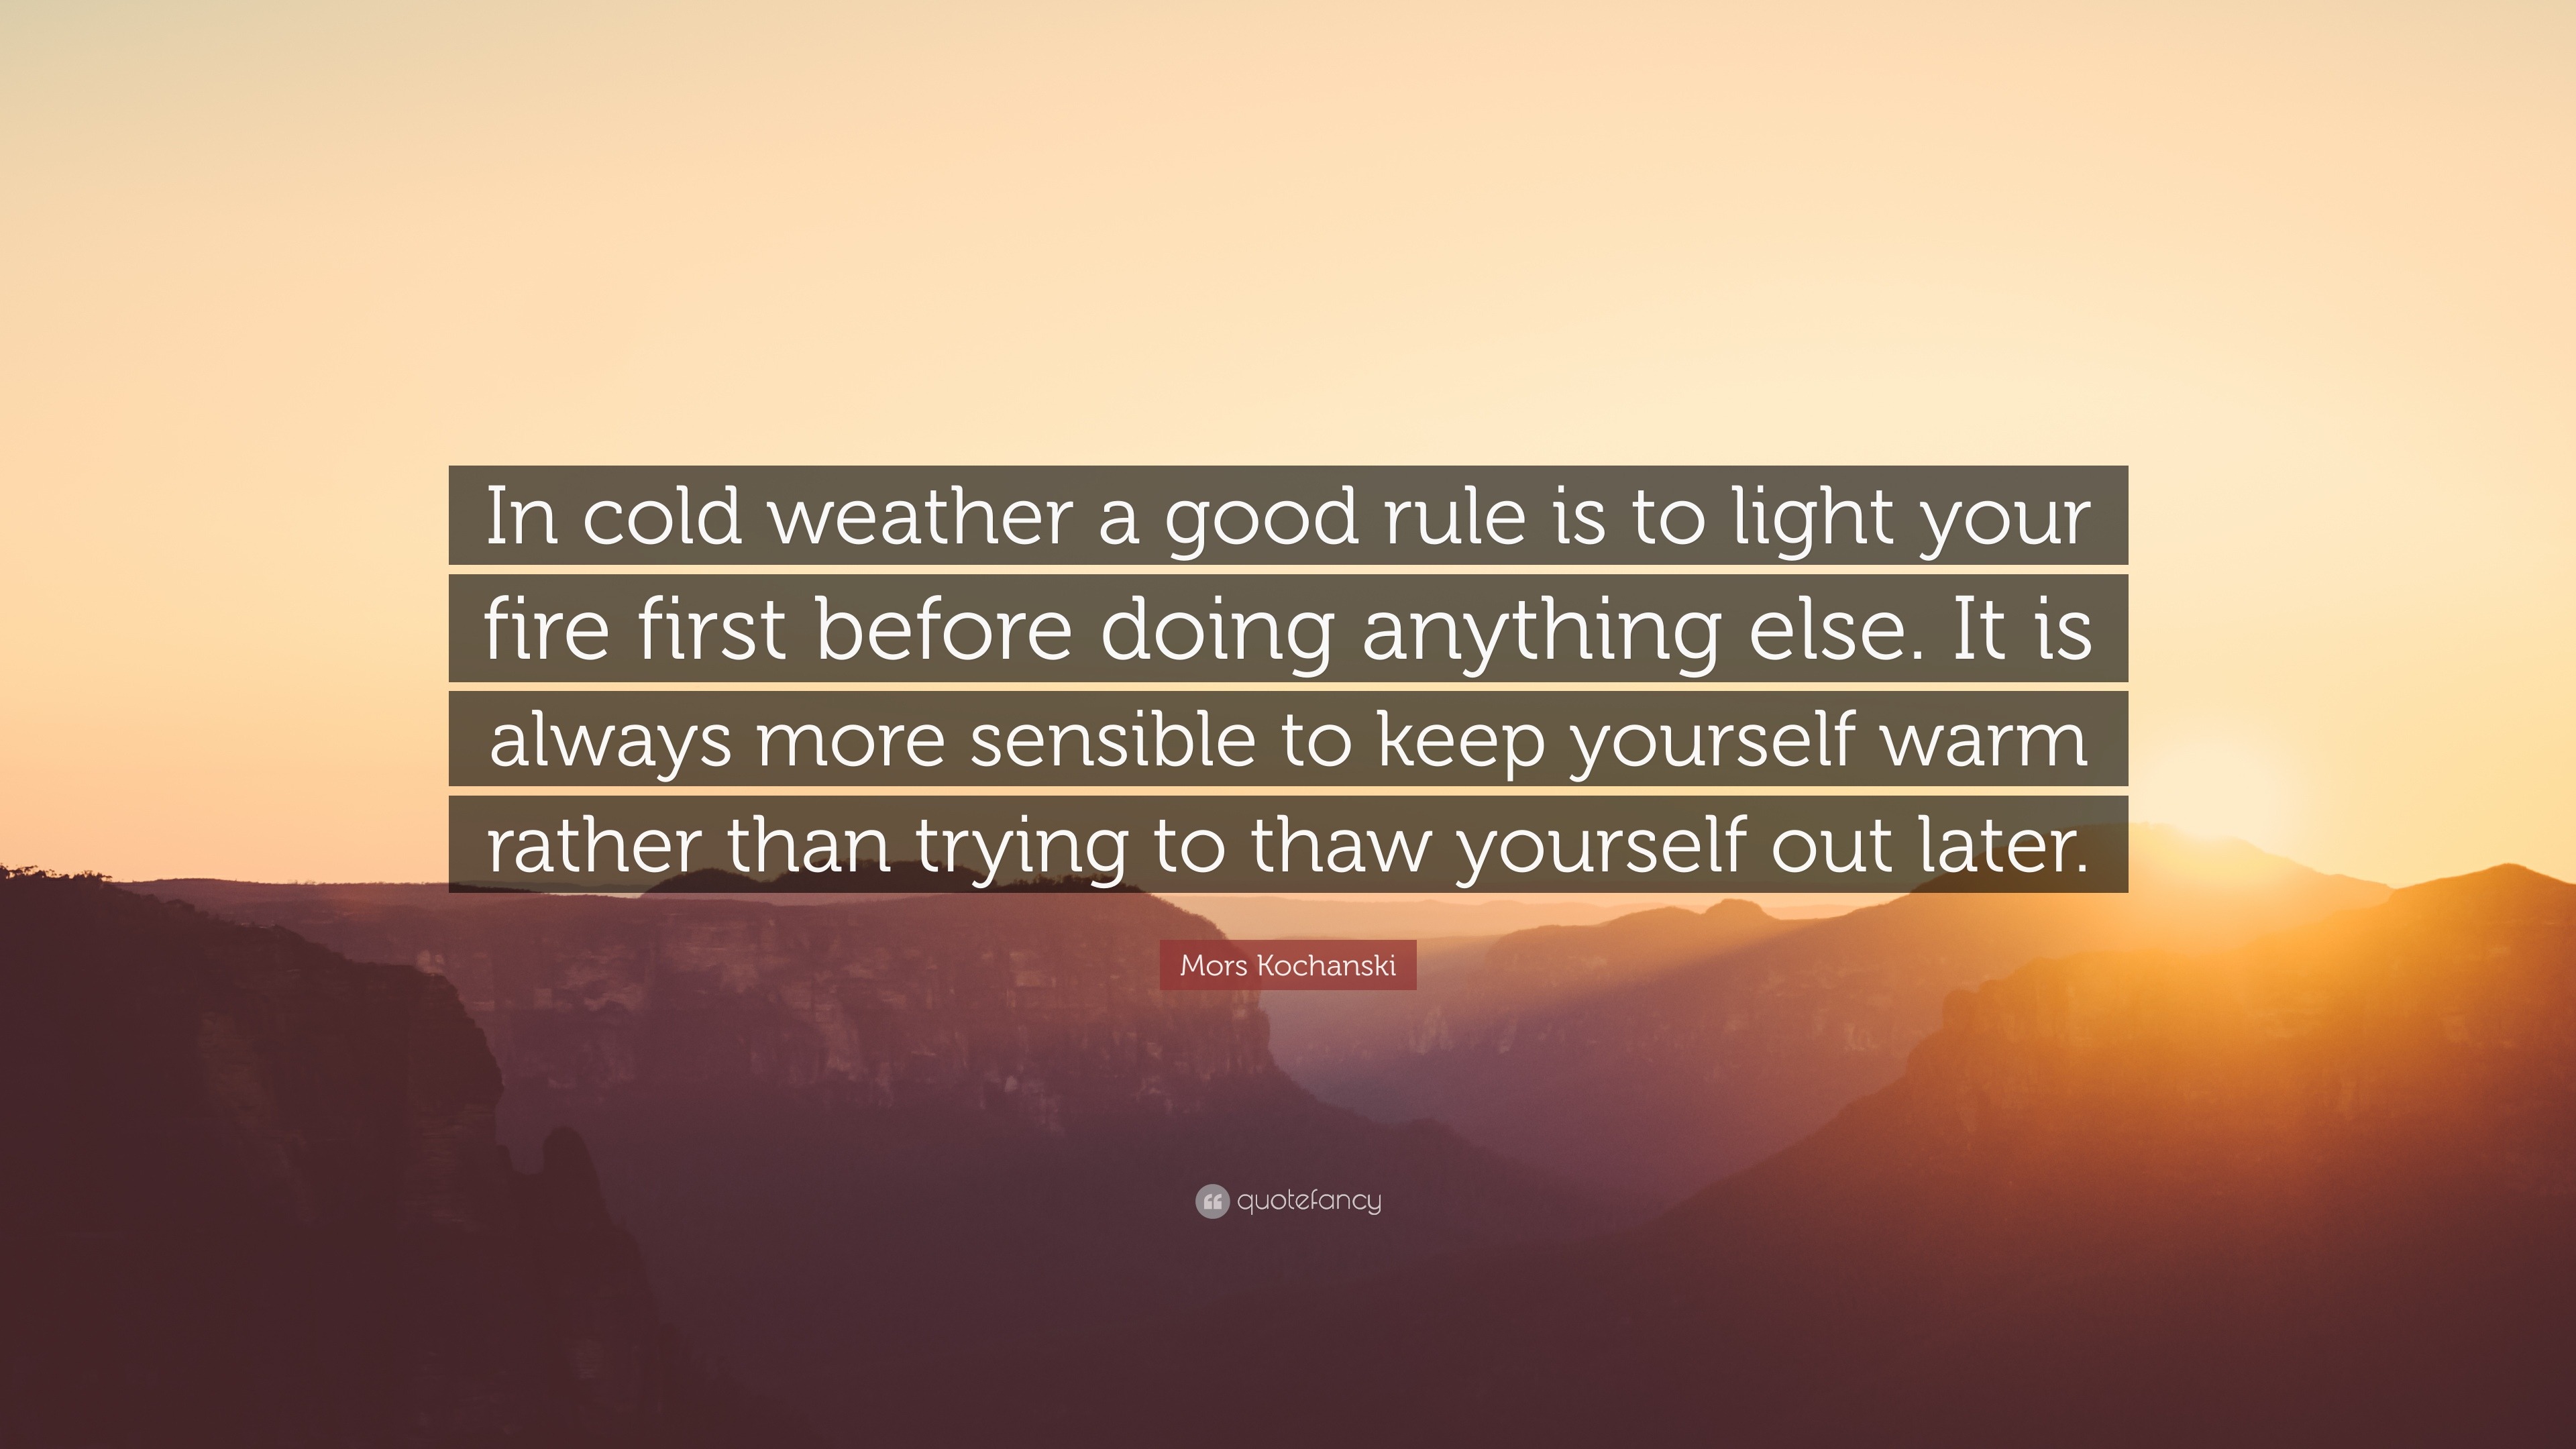 Mors Kochanski Quote: "In cold weather a good rule is to light your fire first before doing ...